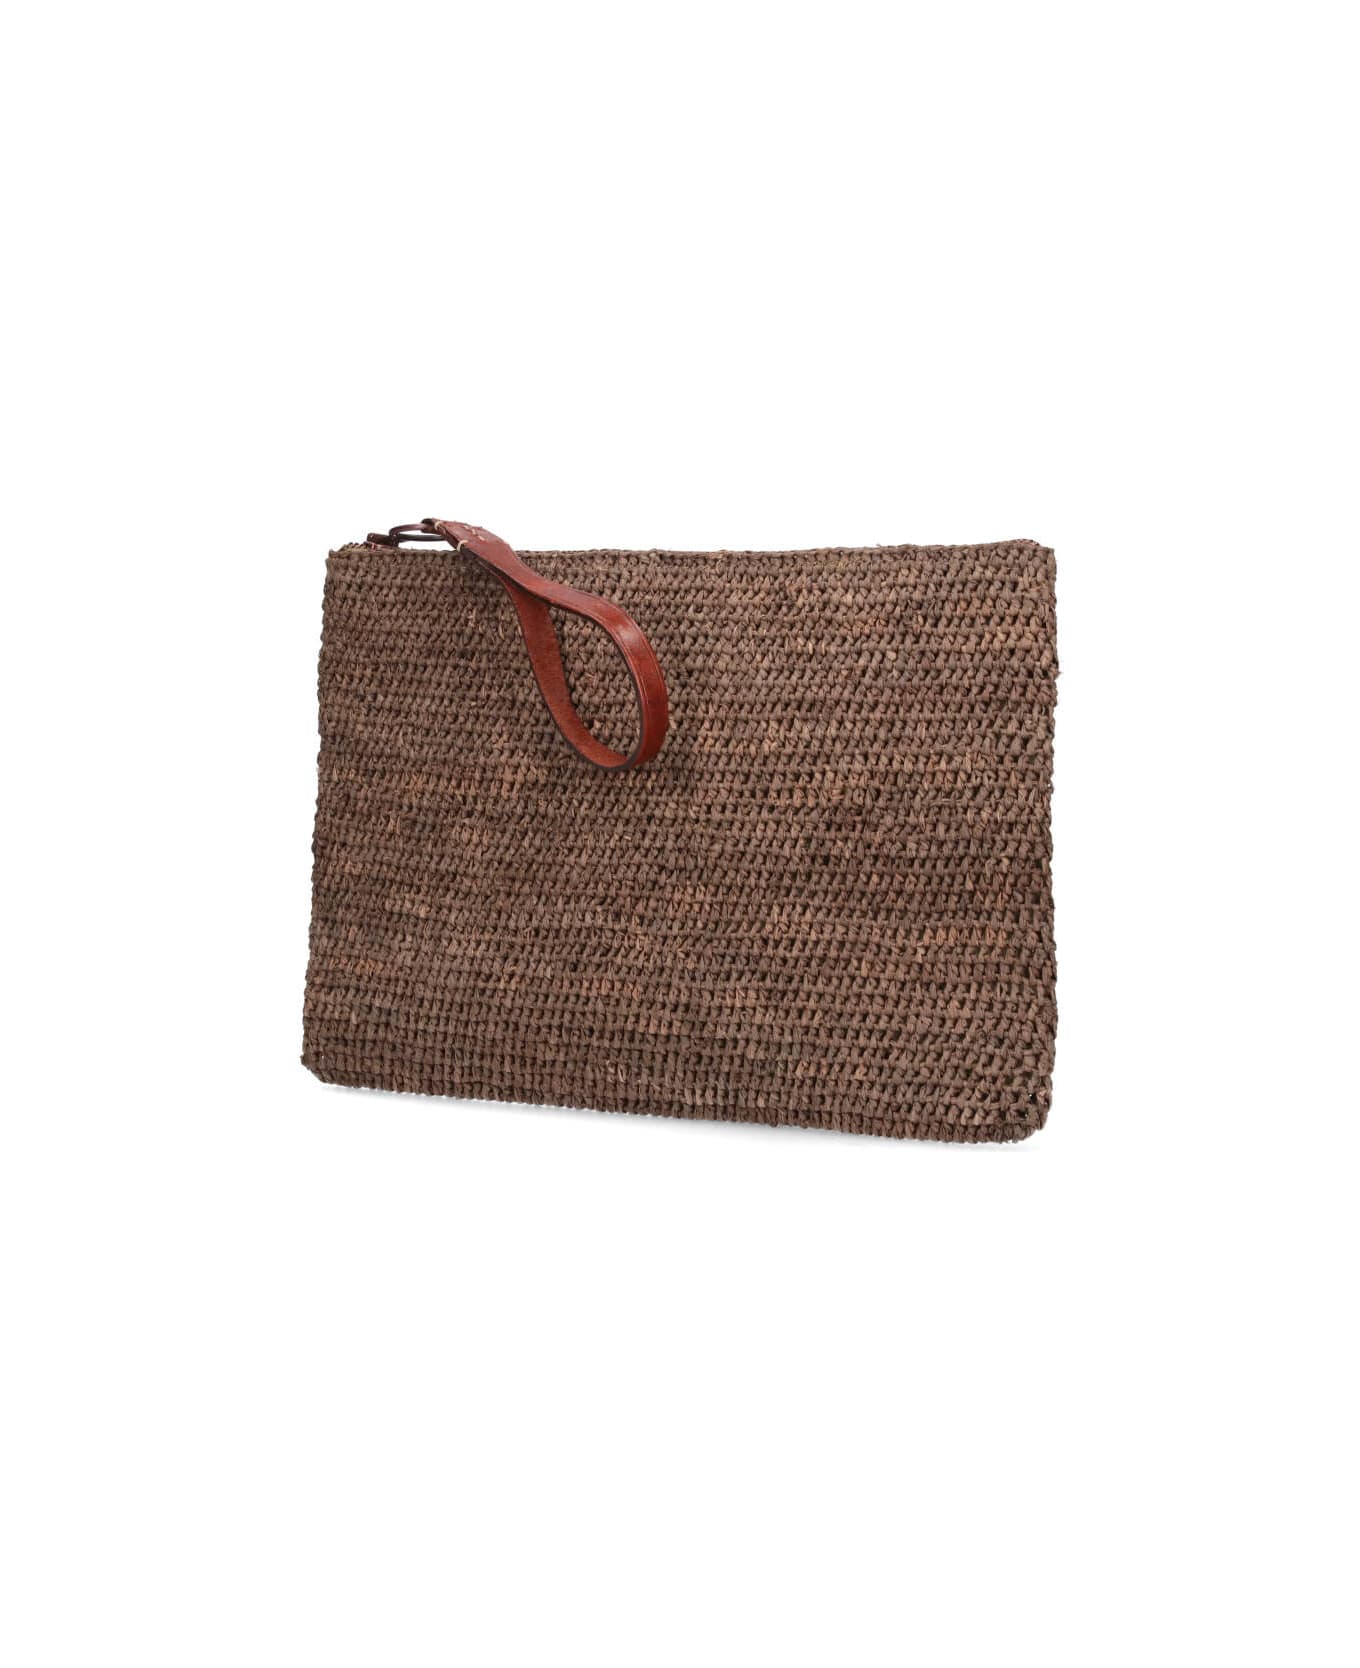 Ibeliv Pouch "ampy" - Brown バッグ